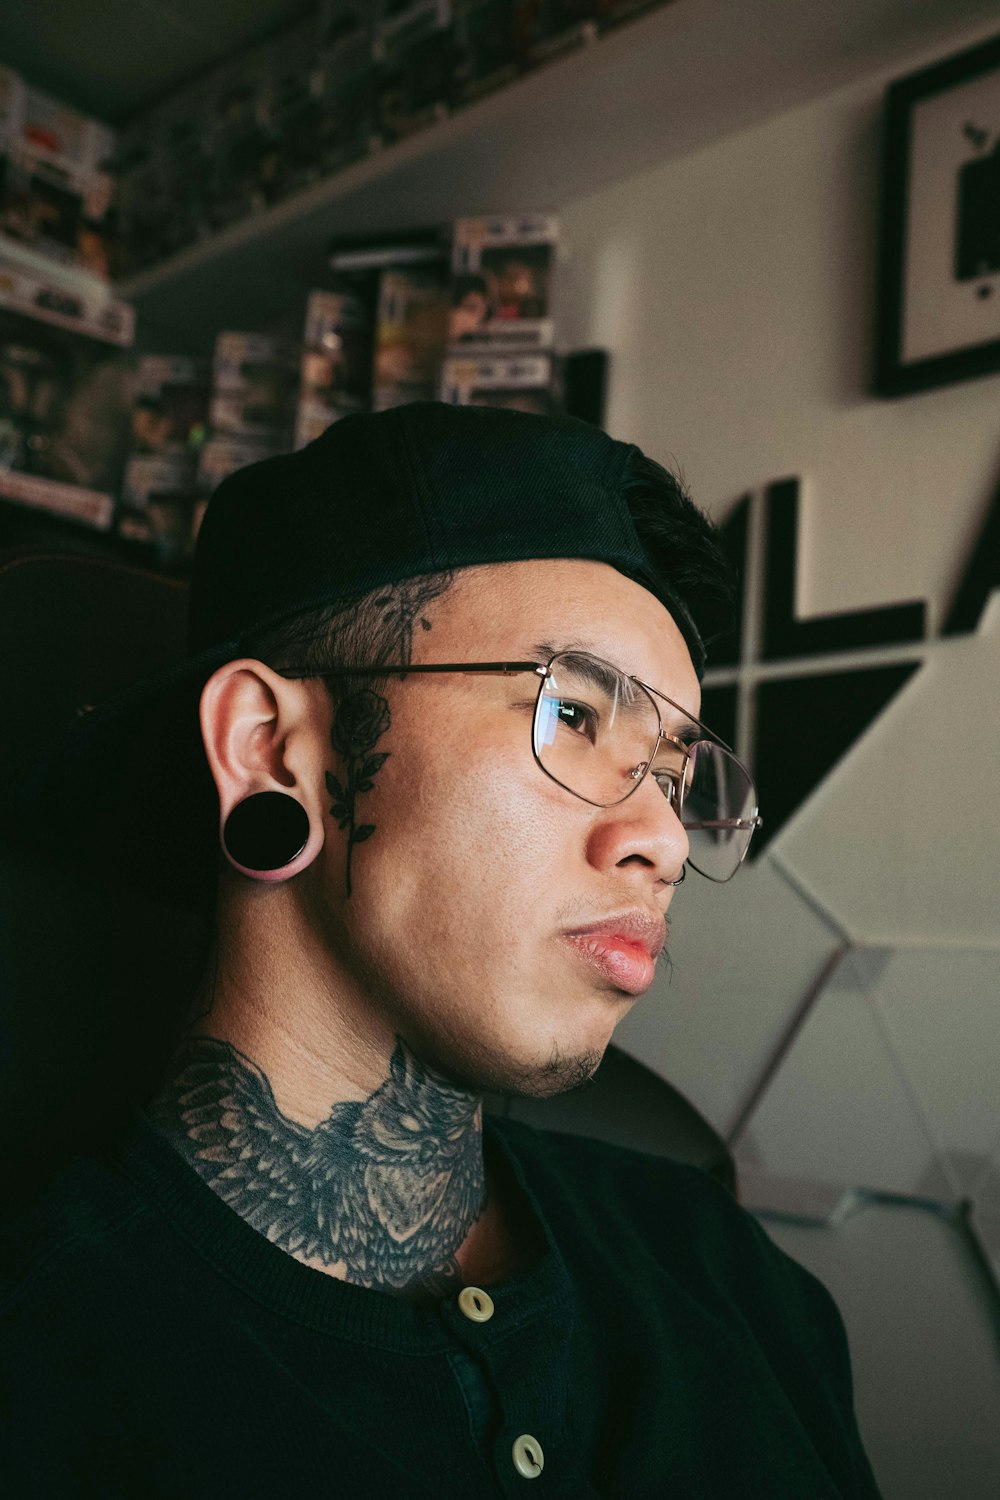 a man with tattoos and piercings on his face